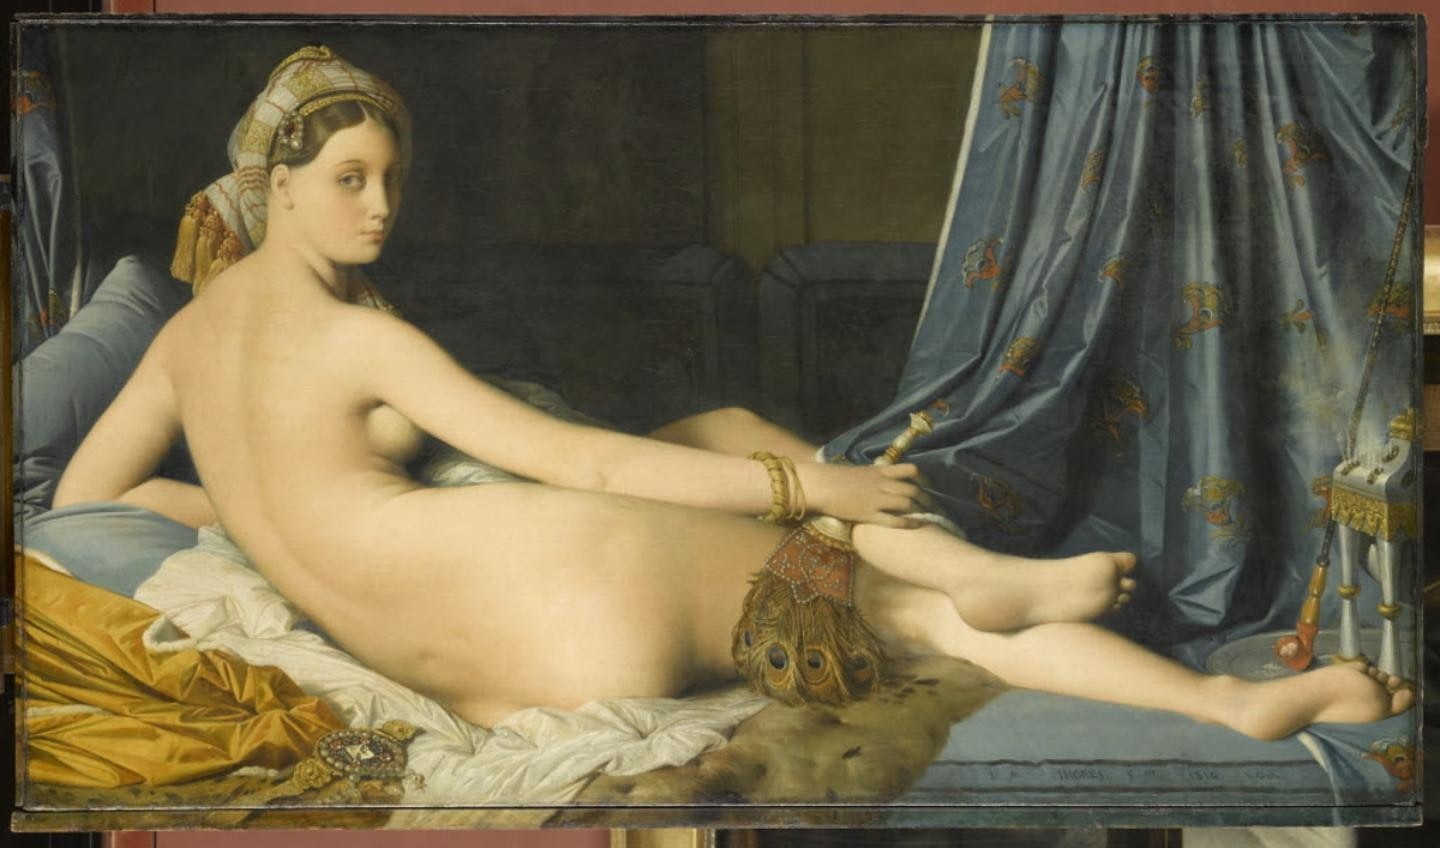 The painting Une Odalisque by Jean-Auguste Dominique Ingres at the Louvre